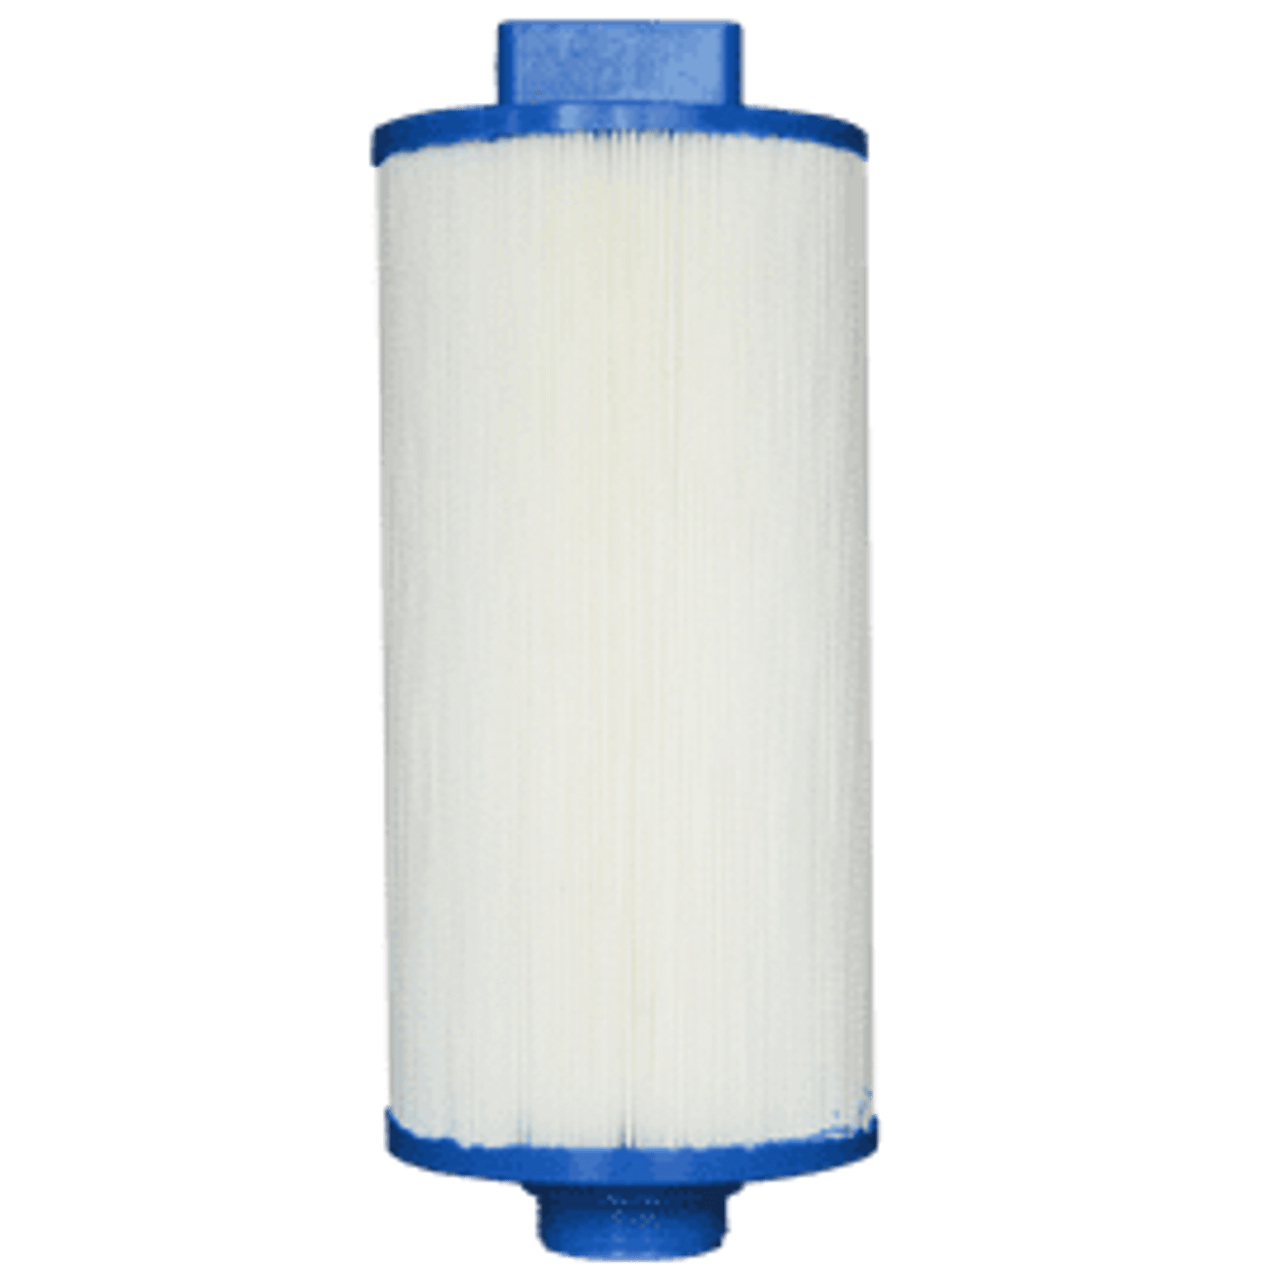 Pleatco PSG25P4 Replacement Filter Cartridge (Unicel 4CH-24)